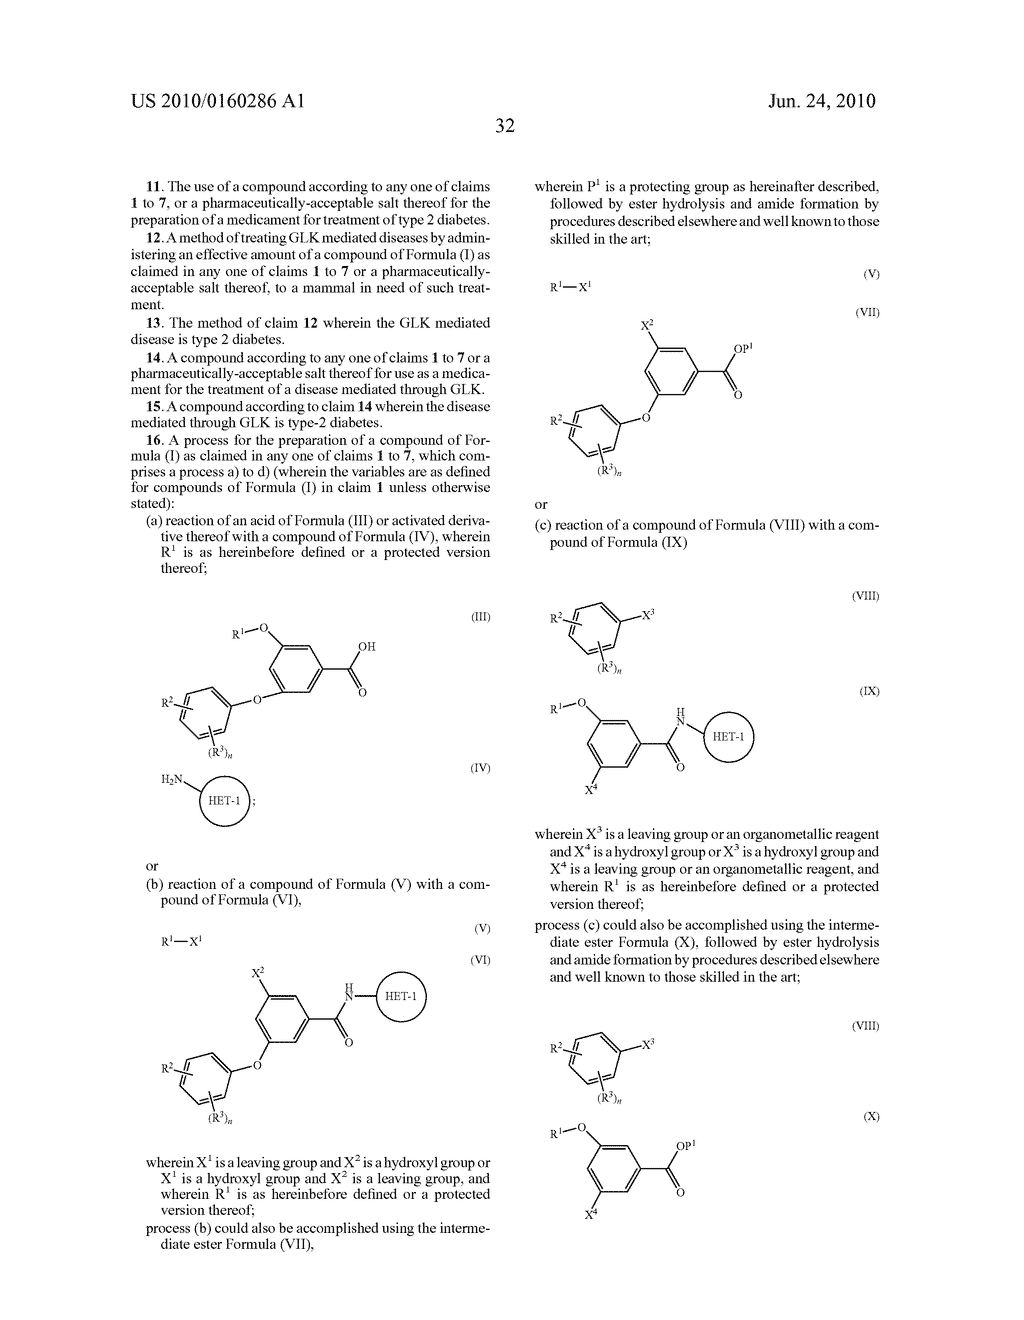 HETEROARYLCARBAMOYLBENZENE DERIVATIVES FOR THE TREATMENT OF DIABETES - diagram, schematic, and image 33